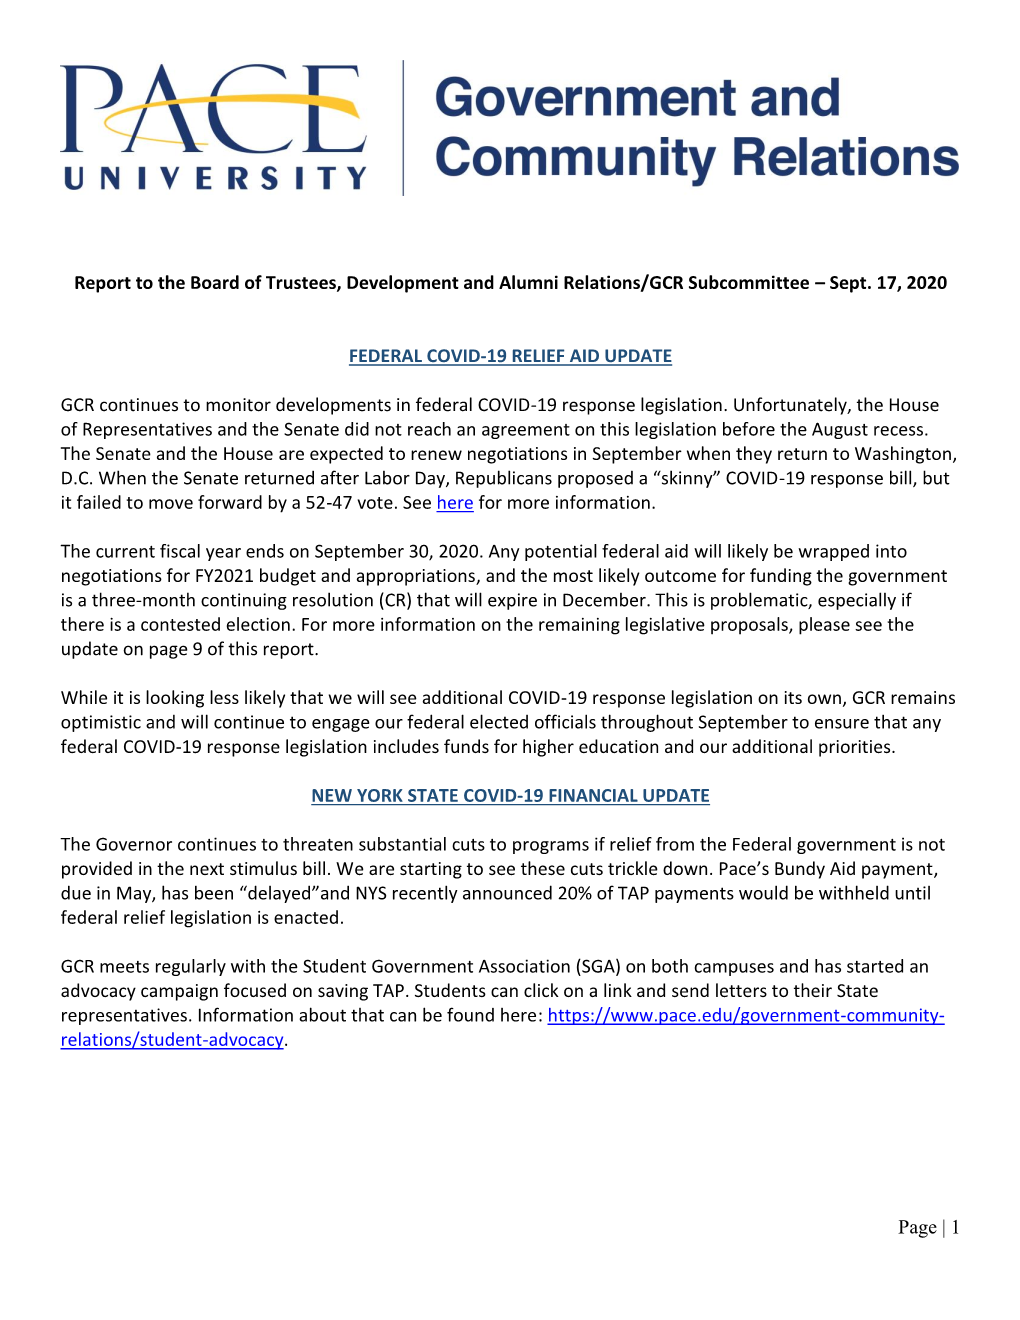 Page | 1 Report to the Board of Trustees, Development and Alumni Relations/GCR Subcommittee – Sept. 17, 2020 FEDERAL COVID-19